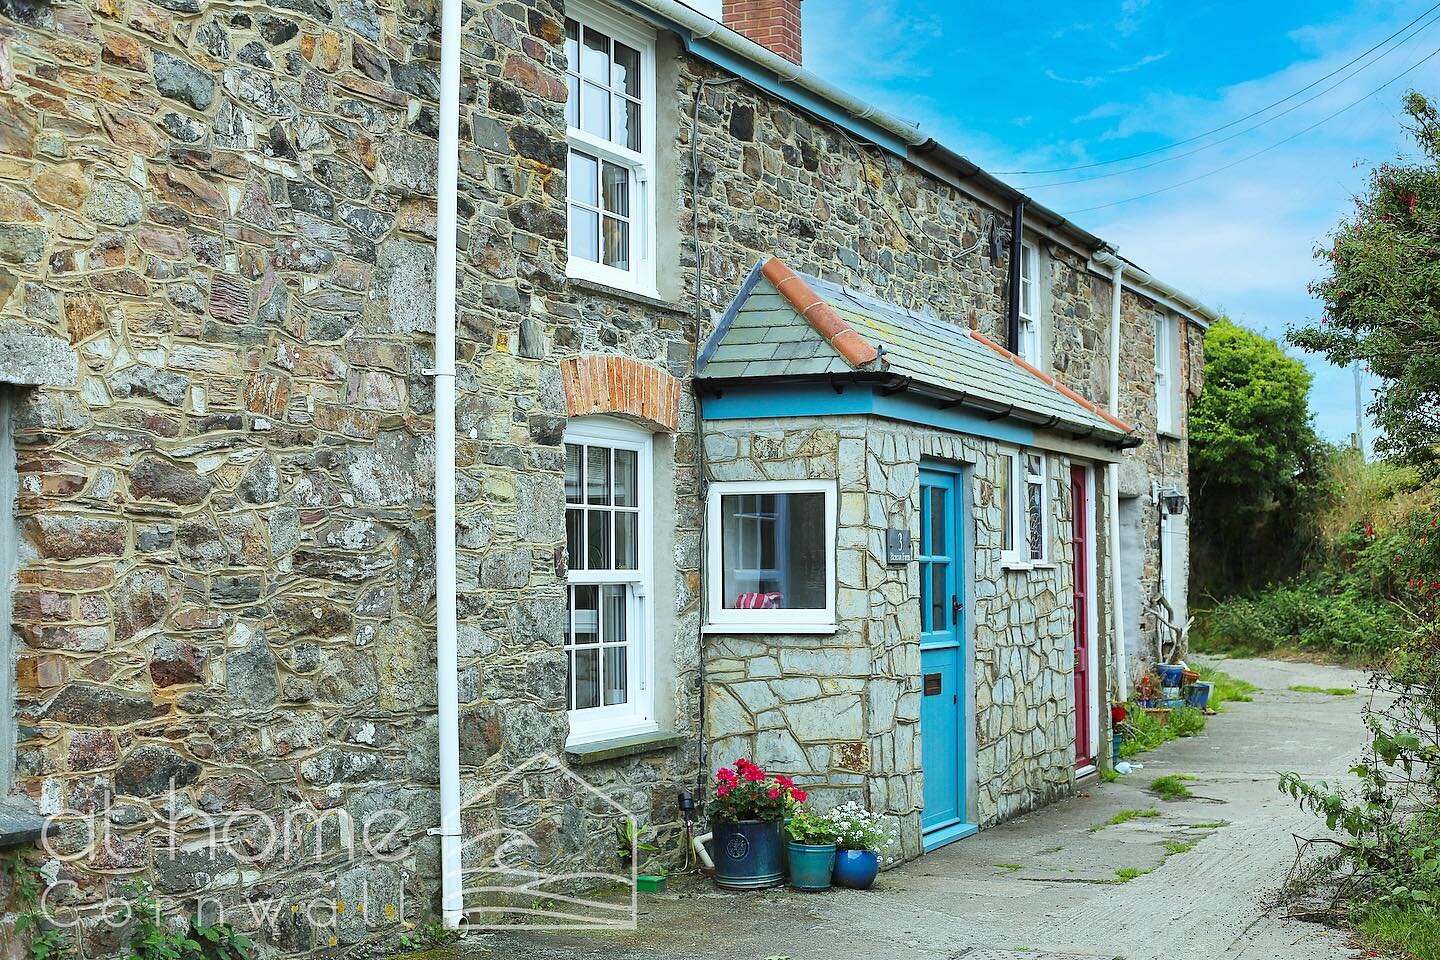 NEW LISTING 💥

St Agnes Beacon
&pound;390,000

Beacon Farm Cottages is an exciting and incredibly rare opportunity to own a beautifully restored, 2-bedroom, mid terrace, character Cornish cottage on the sought-after St Agnes Beacon. 
This stunning h